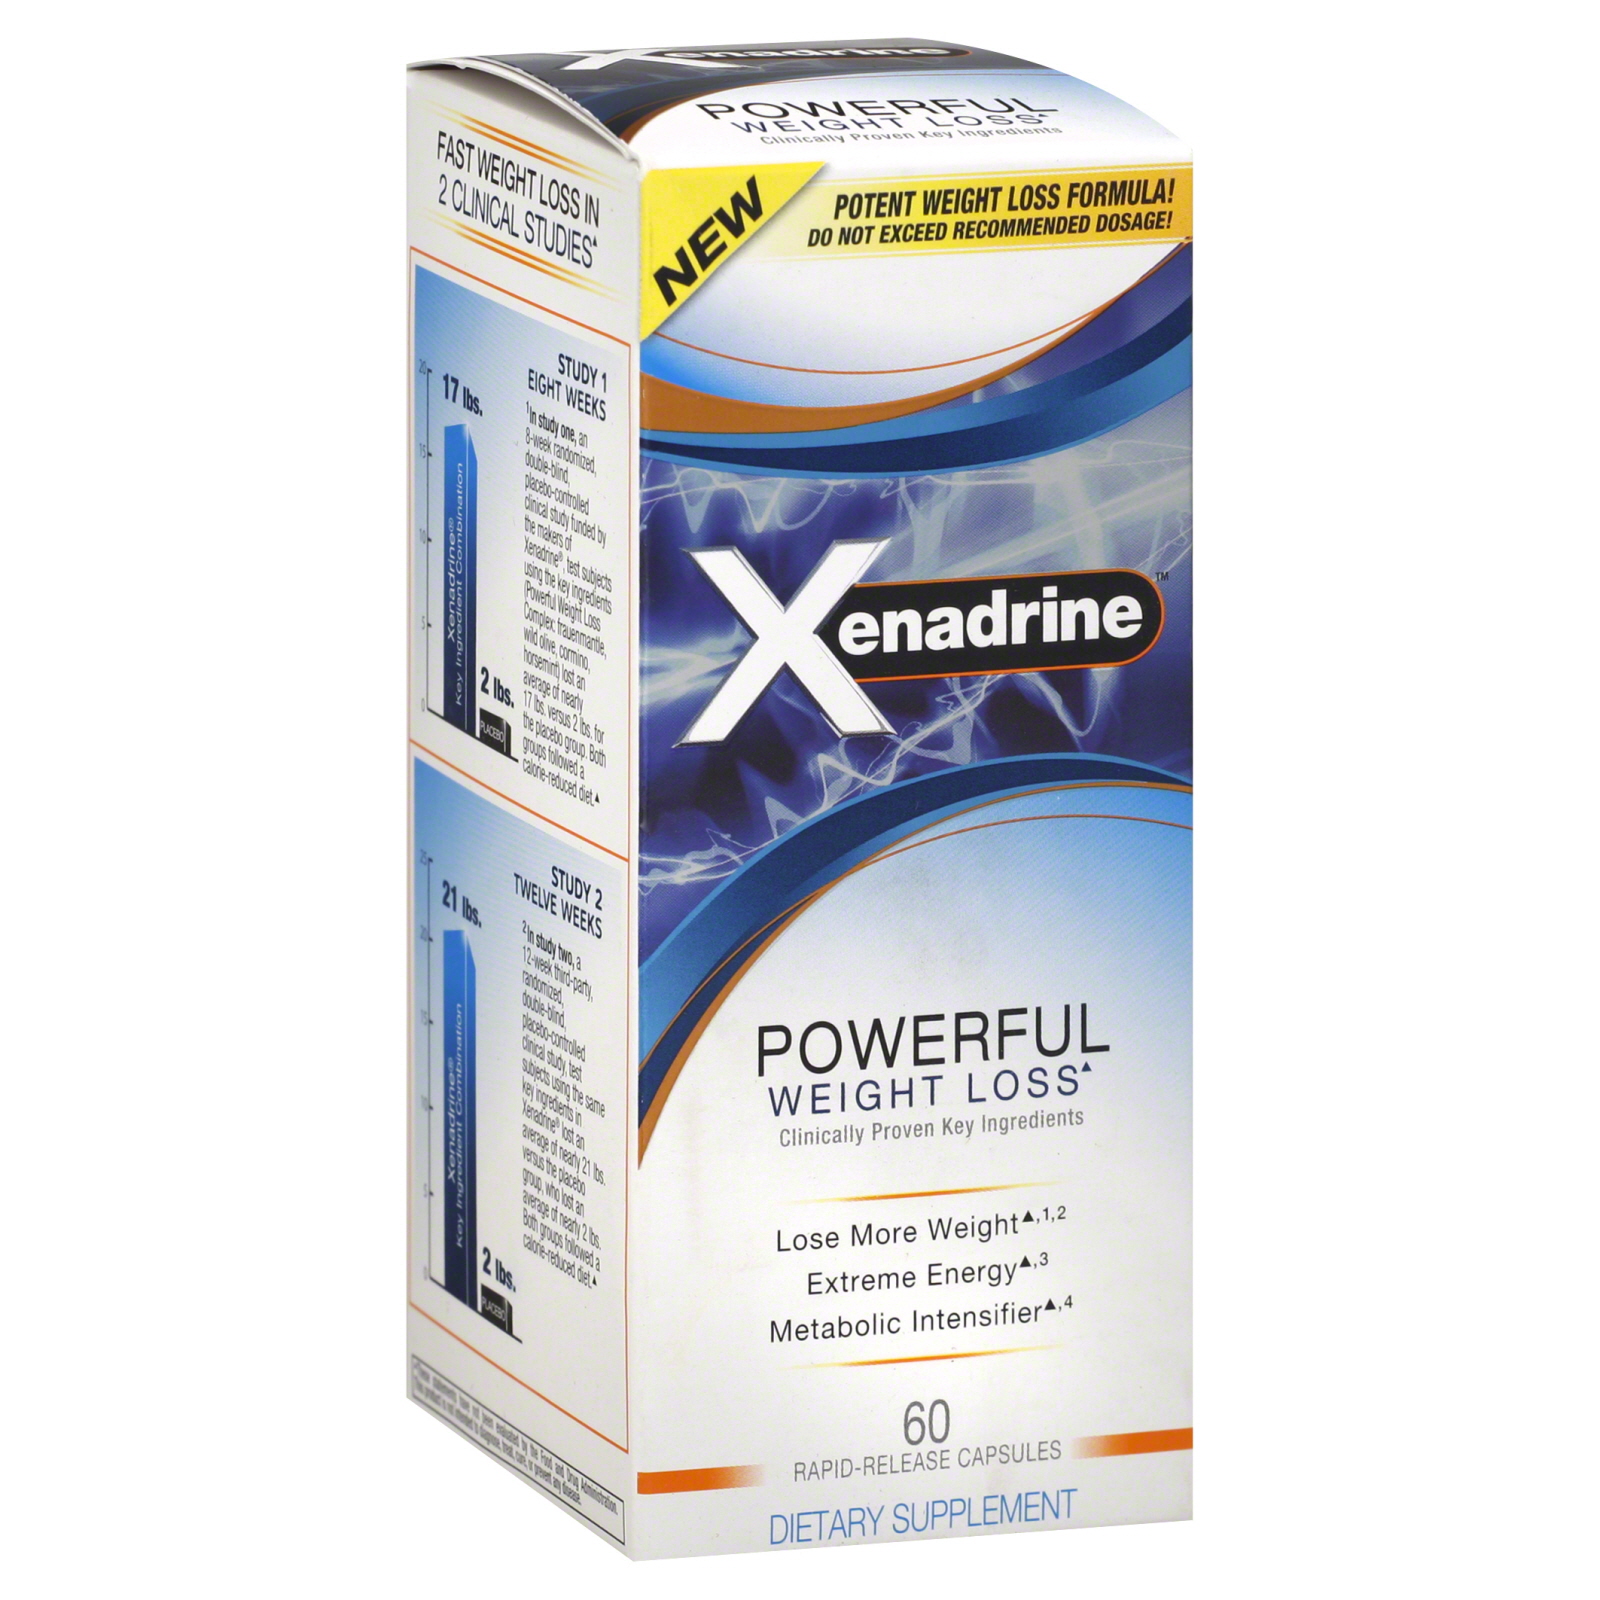 Xenadrine Ultra Weight Loss Supplement, Research Strength, Rapid-Release Capsules, 60 capsules